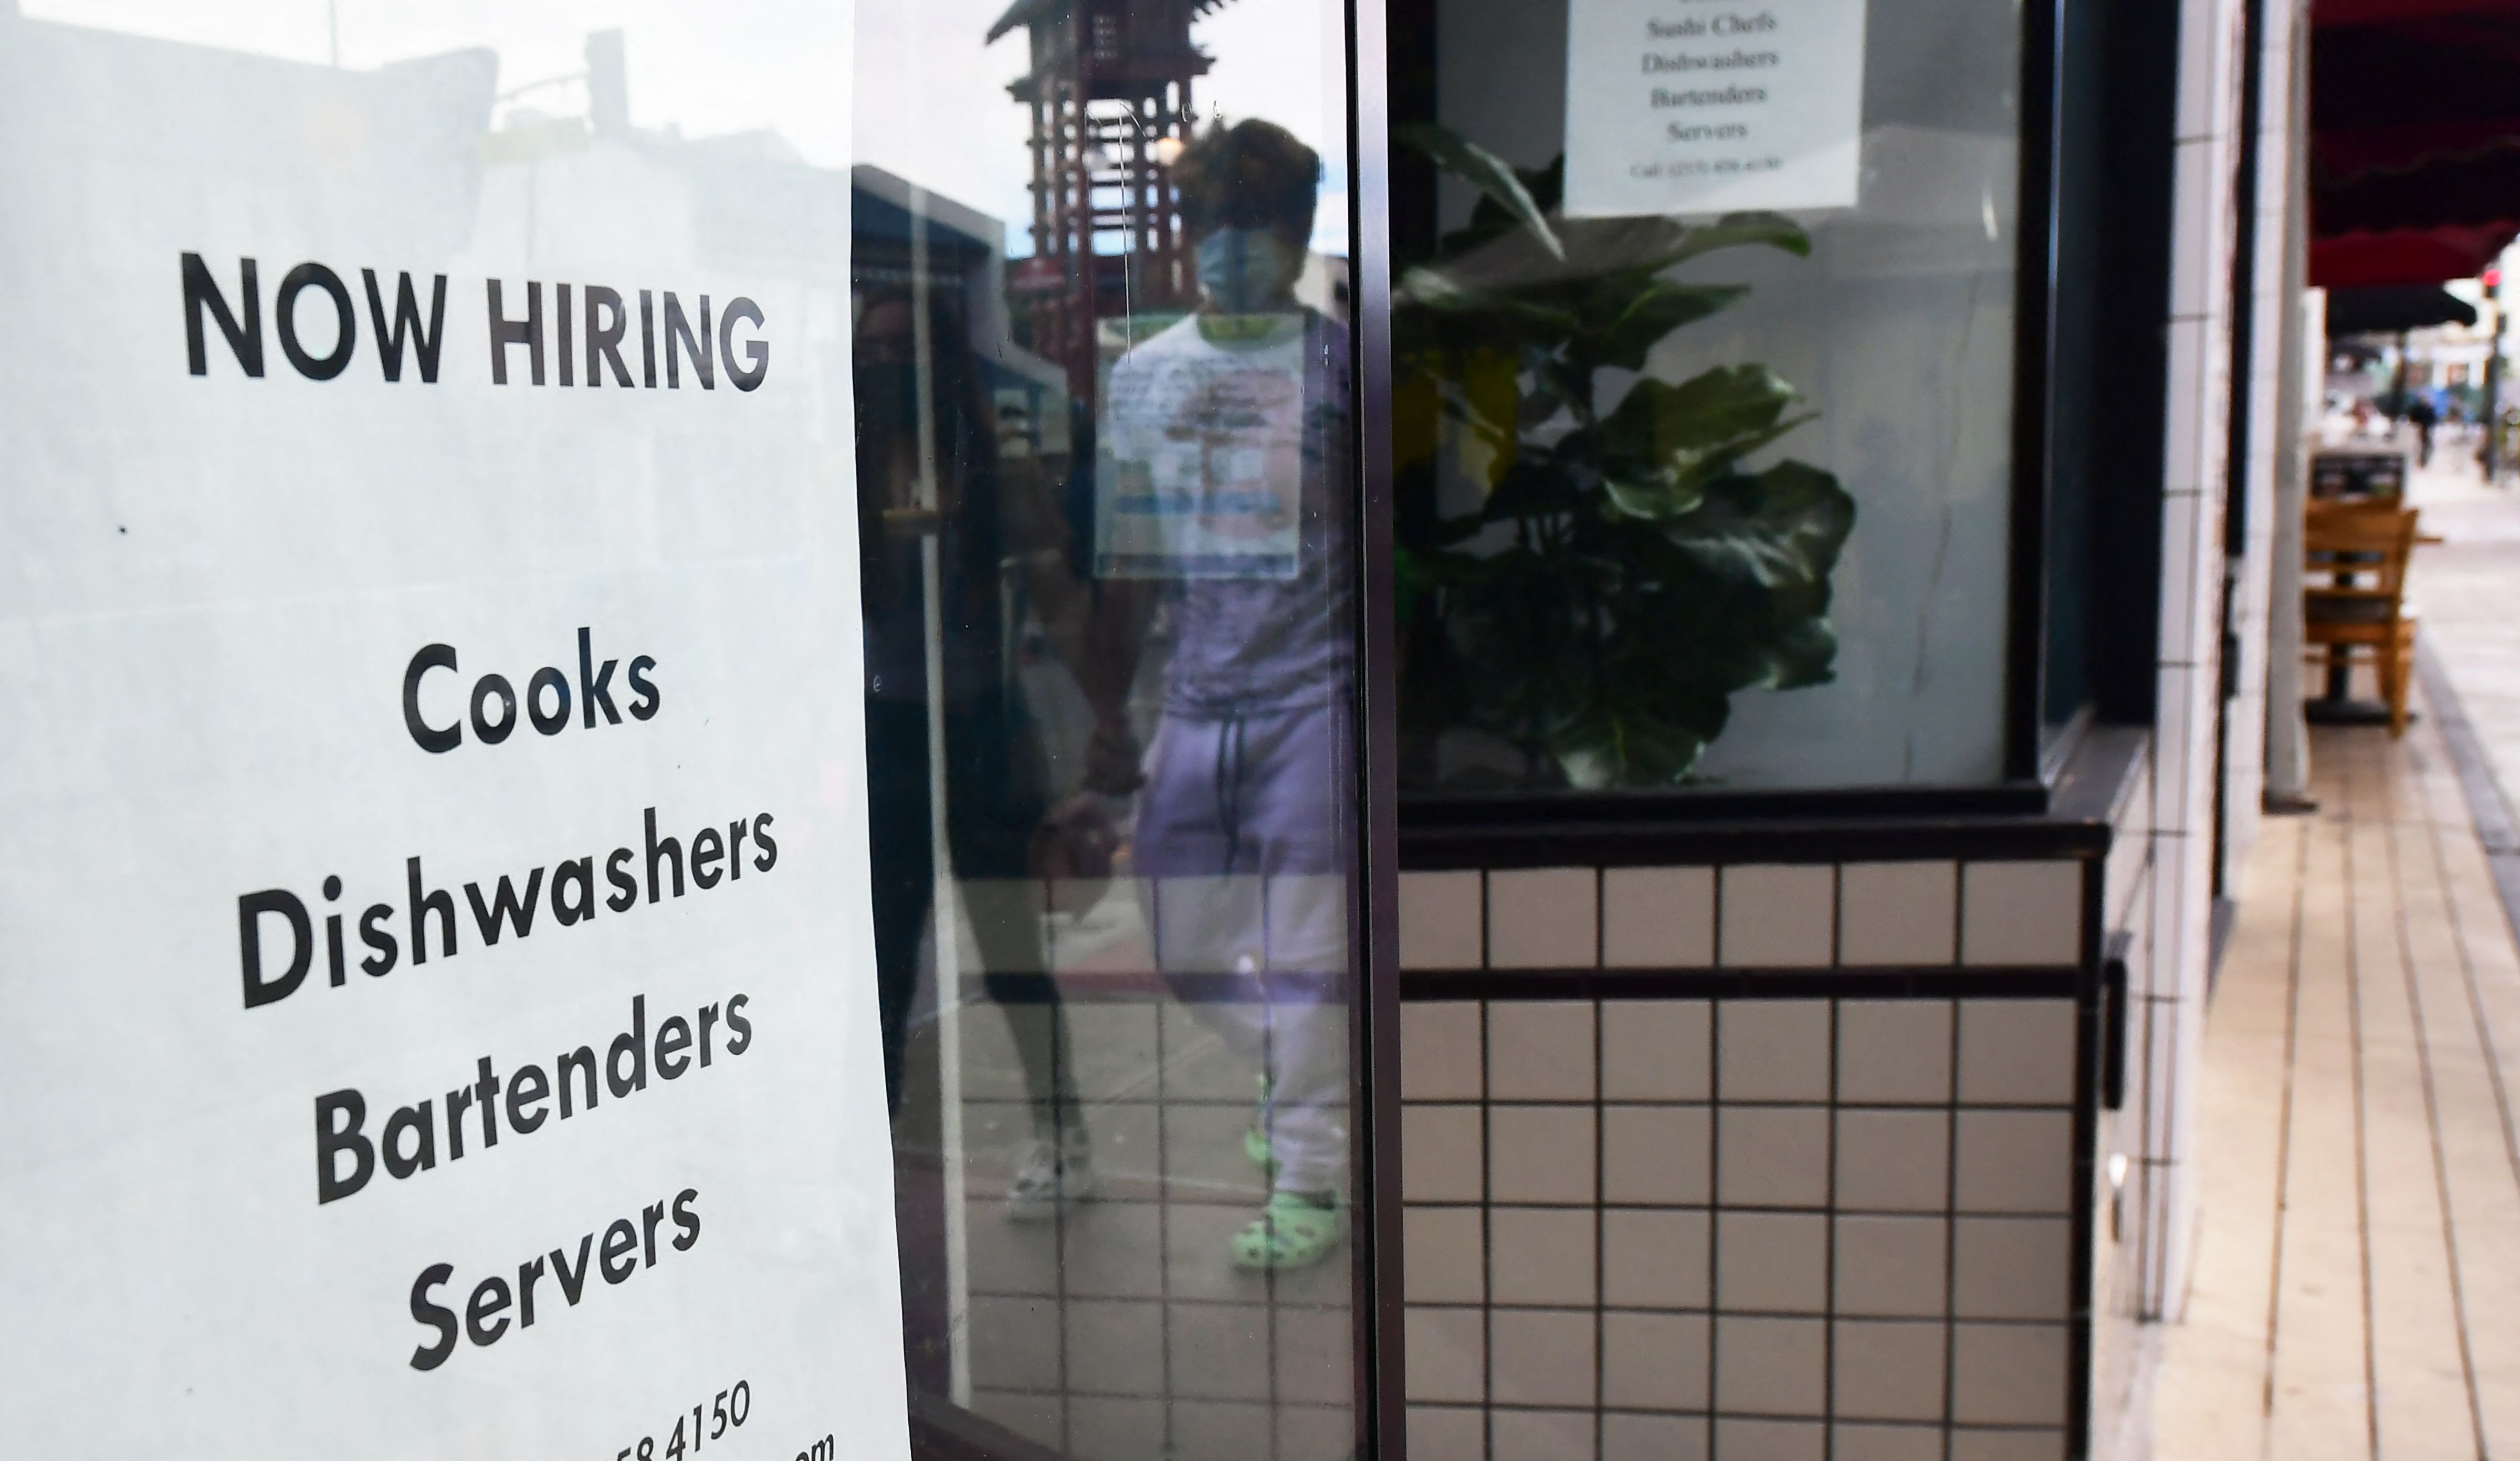 A "now hiring" sign is posted in the window of a restaurant in Los Angeles, California on January 28, 2022. (Frederic J. BROWN / AFP / Getty Images)